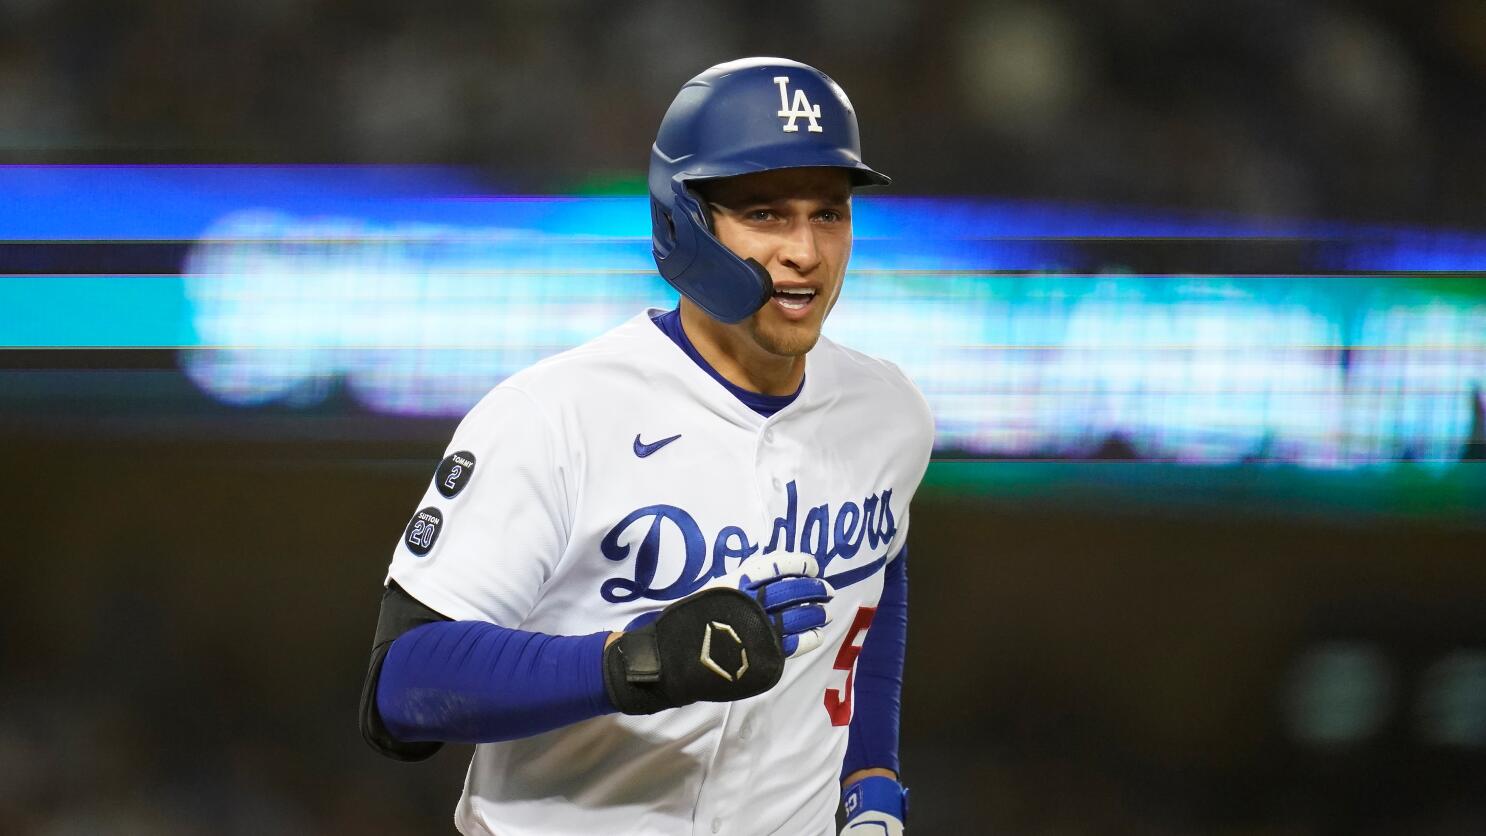 Texas Rangers sign free agents Marcus Semien and Corey Seager for